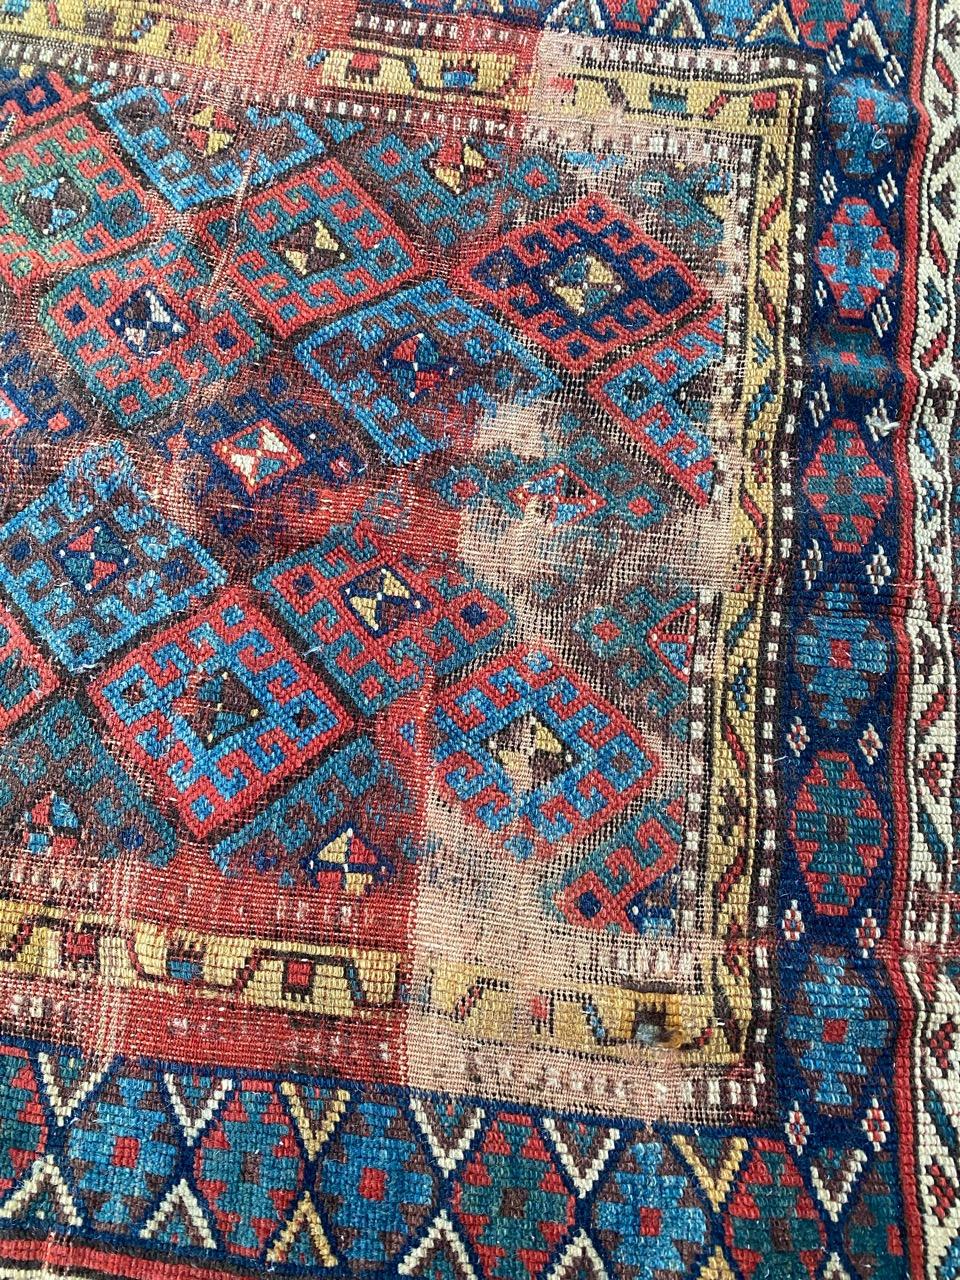 Very beautiful 19th century horse cover tribal rug with beautiful geometrical design and nice natural colors, entirely hand knotted with wool velvet on wool foundation.

✨✨✨
